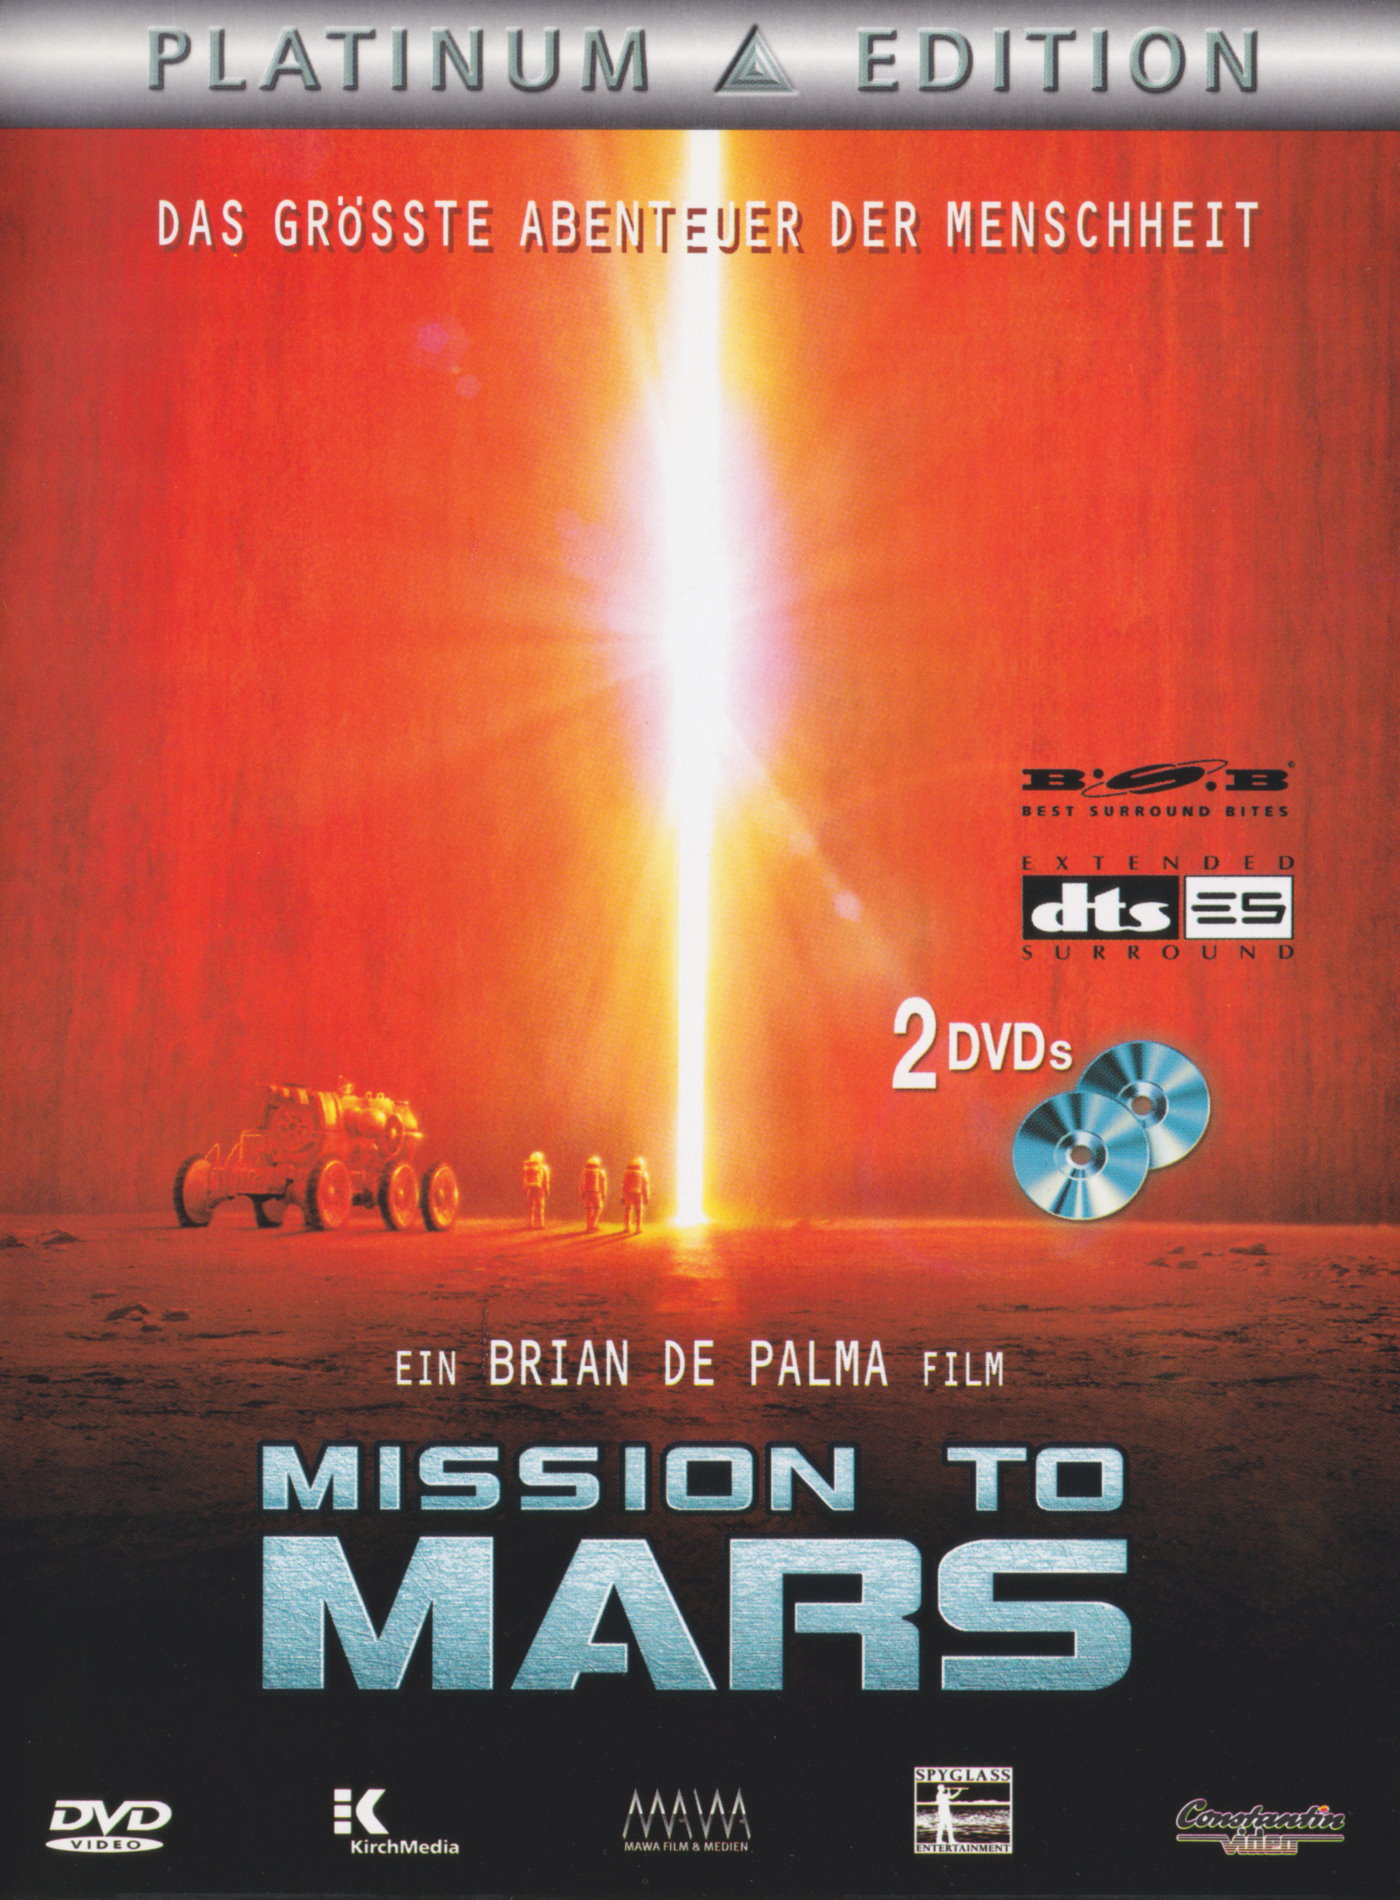 Cover - Mission to Mars.jpg